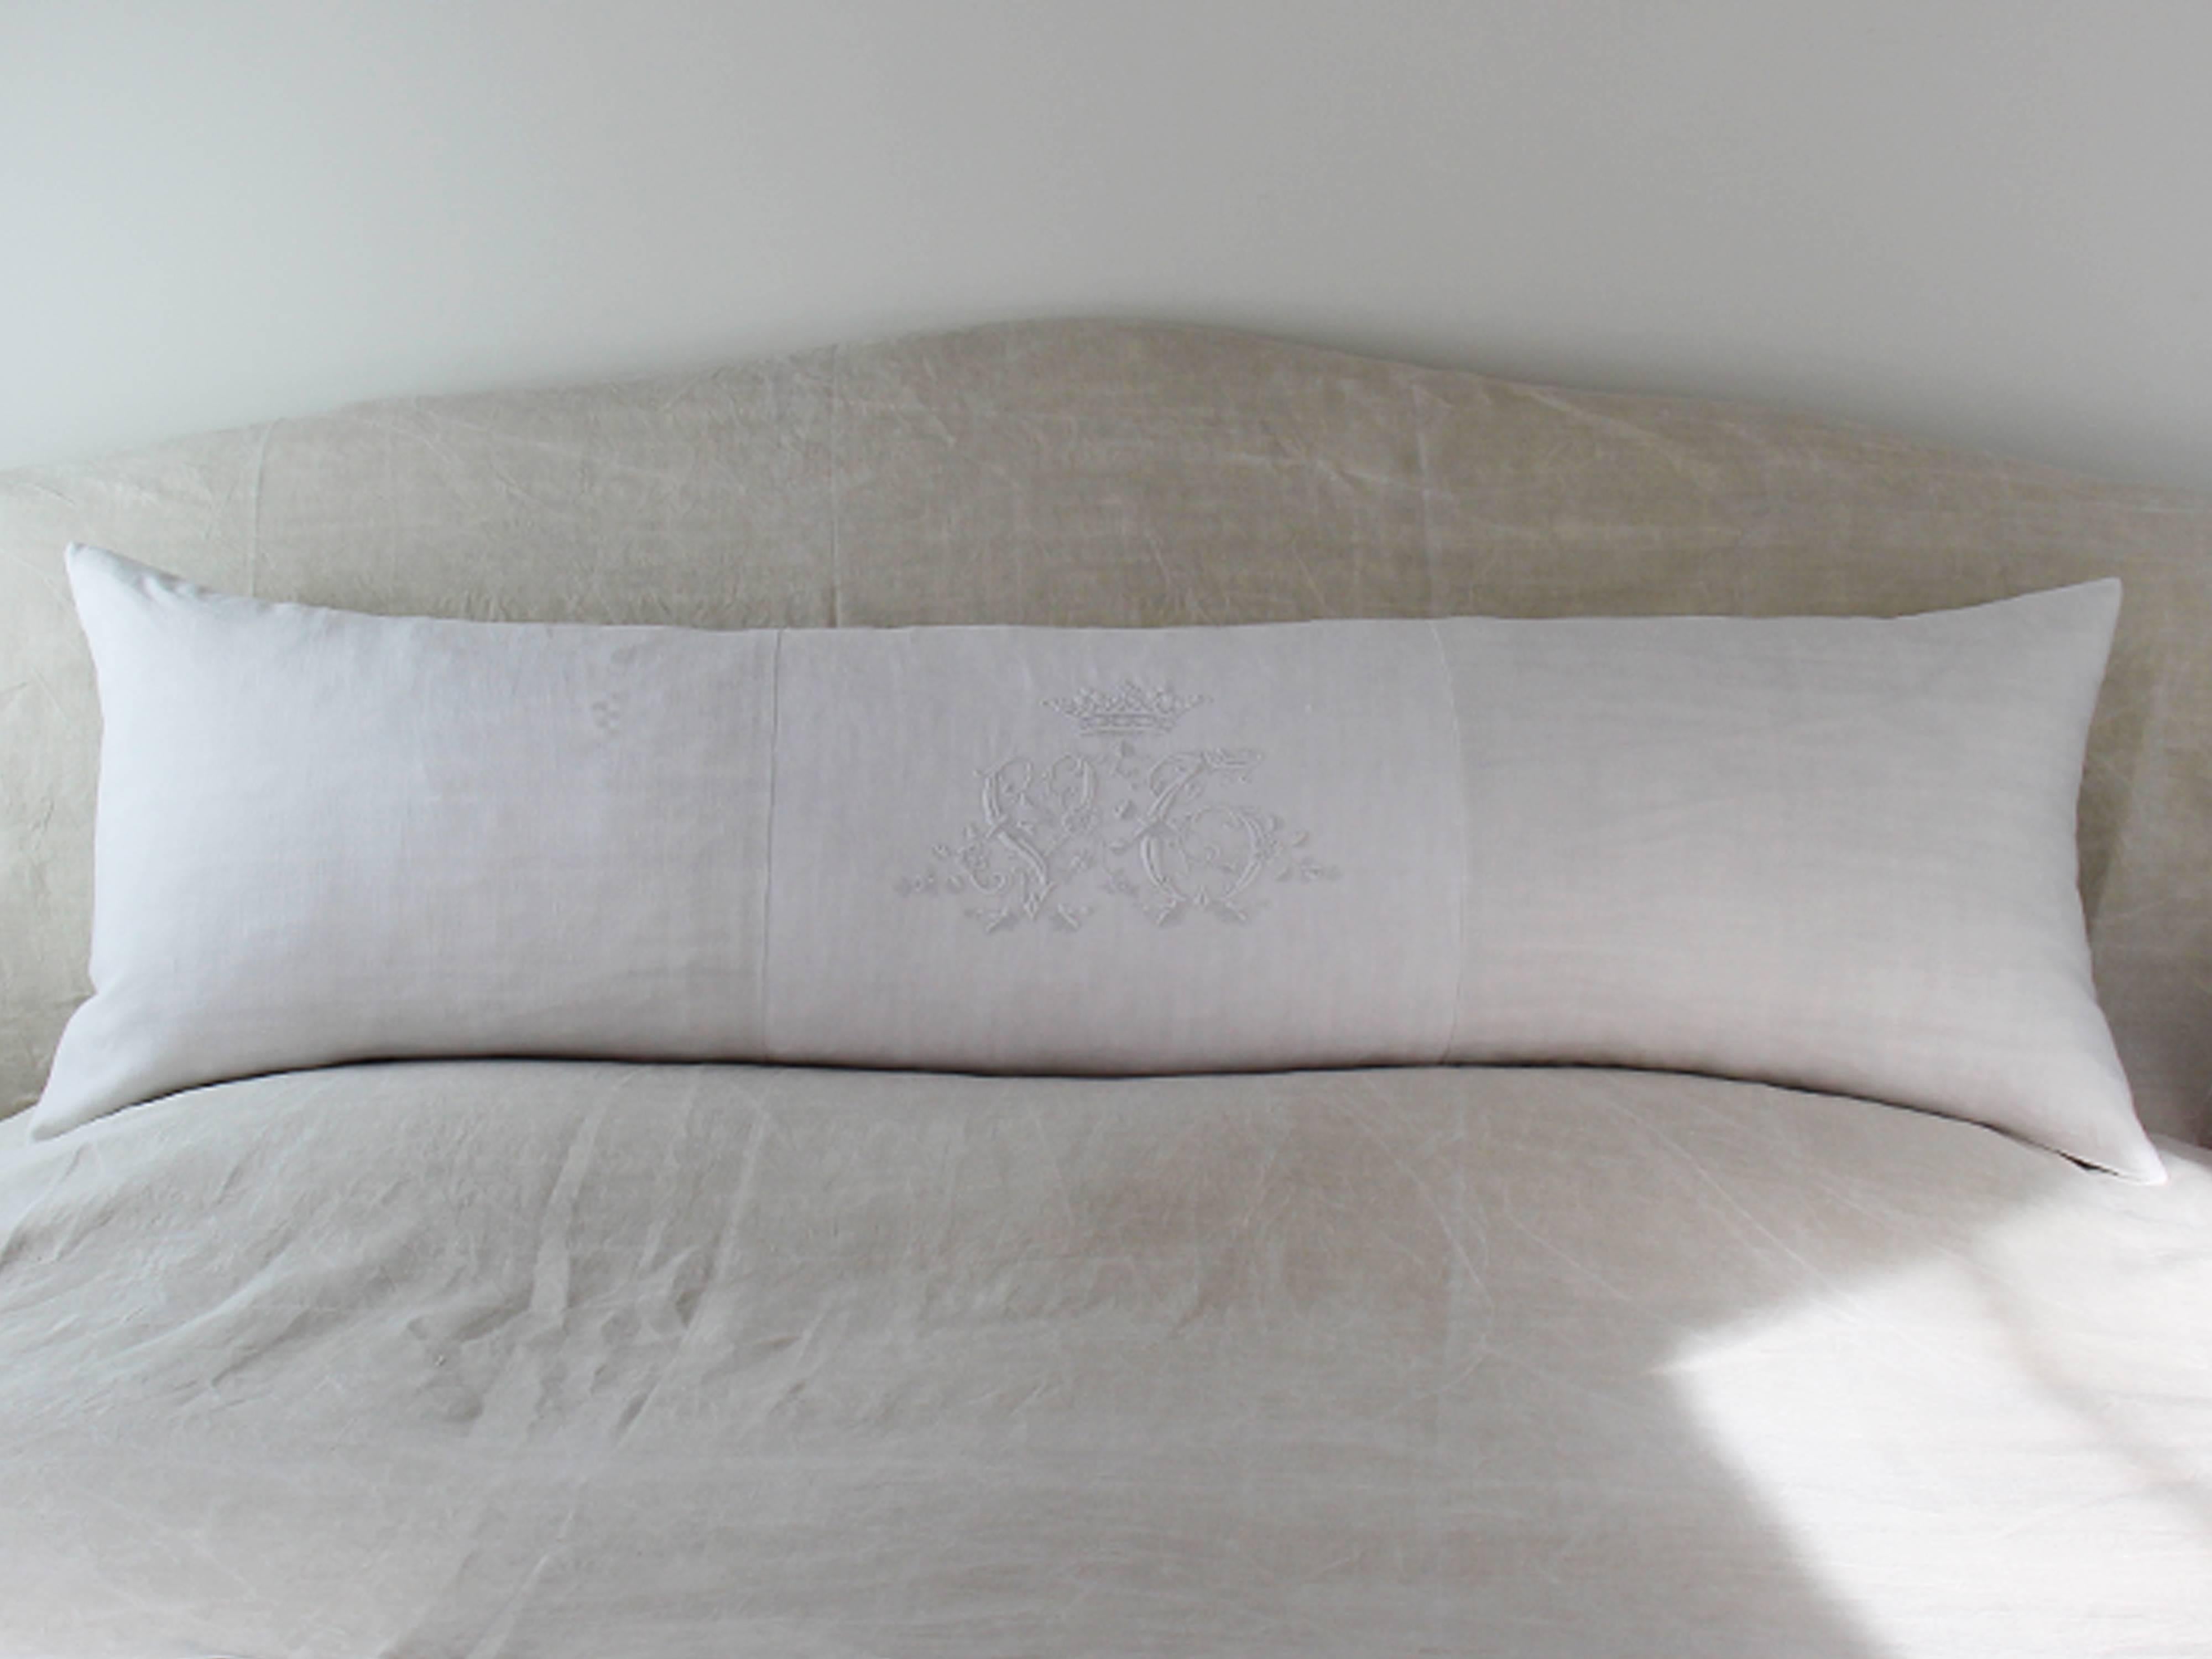 Charlotte Casadéjus collects unique and exceptional antique lace, embroidery, monograms and linens and uses them to create these wonderful pillows, cushions and bolsters. Her bolsters are particularly popular.

This one uses antique French linen